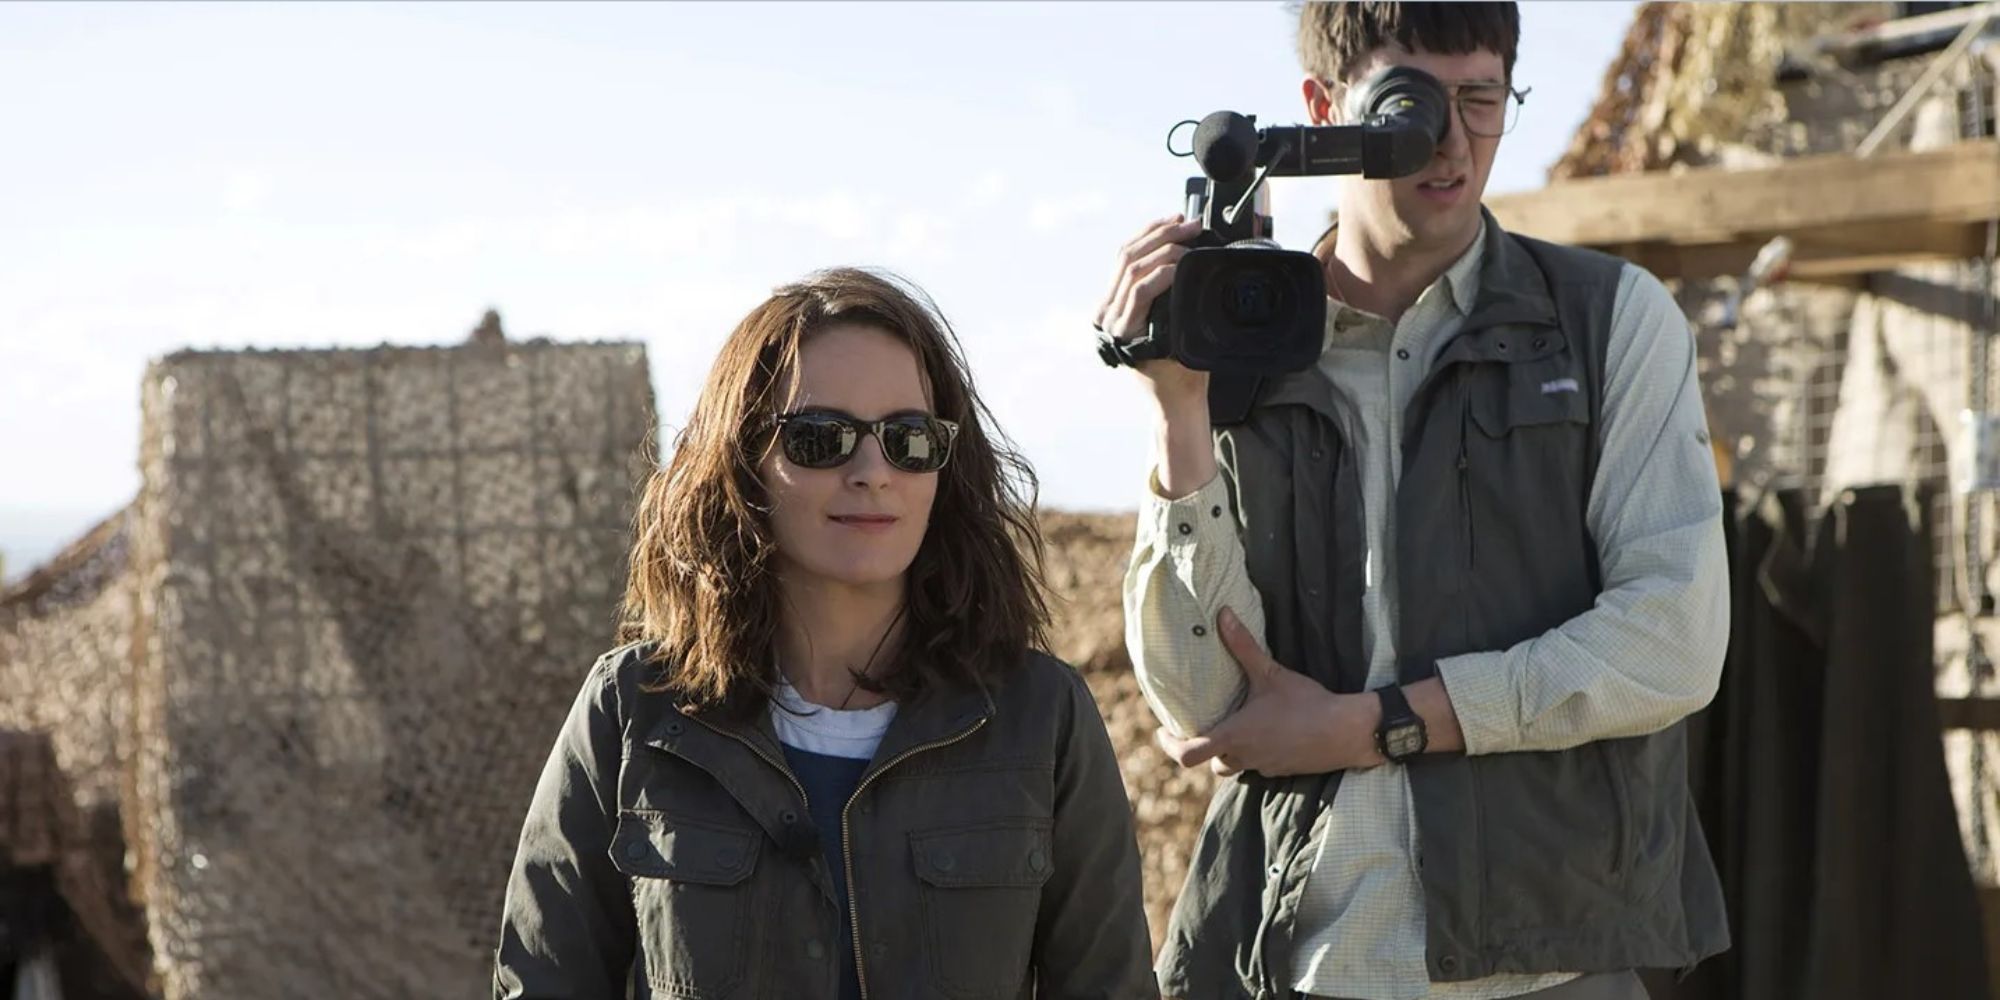 Tina Fey in the desert with a cameran behind her in 'Whiskey Tango Foxtrot'